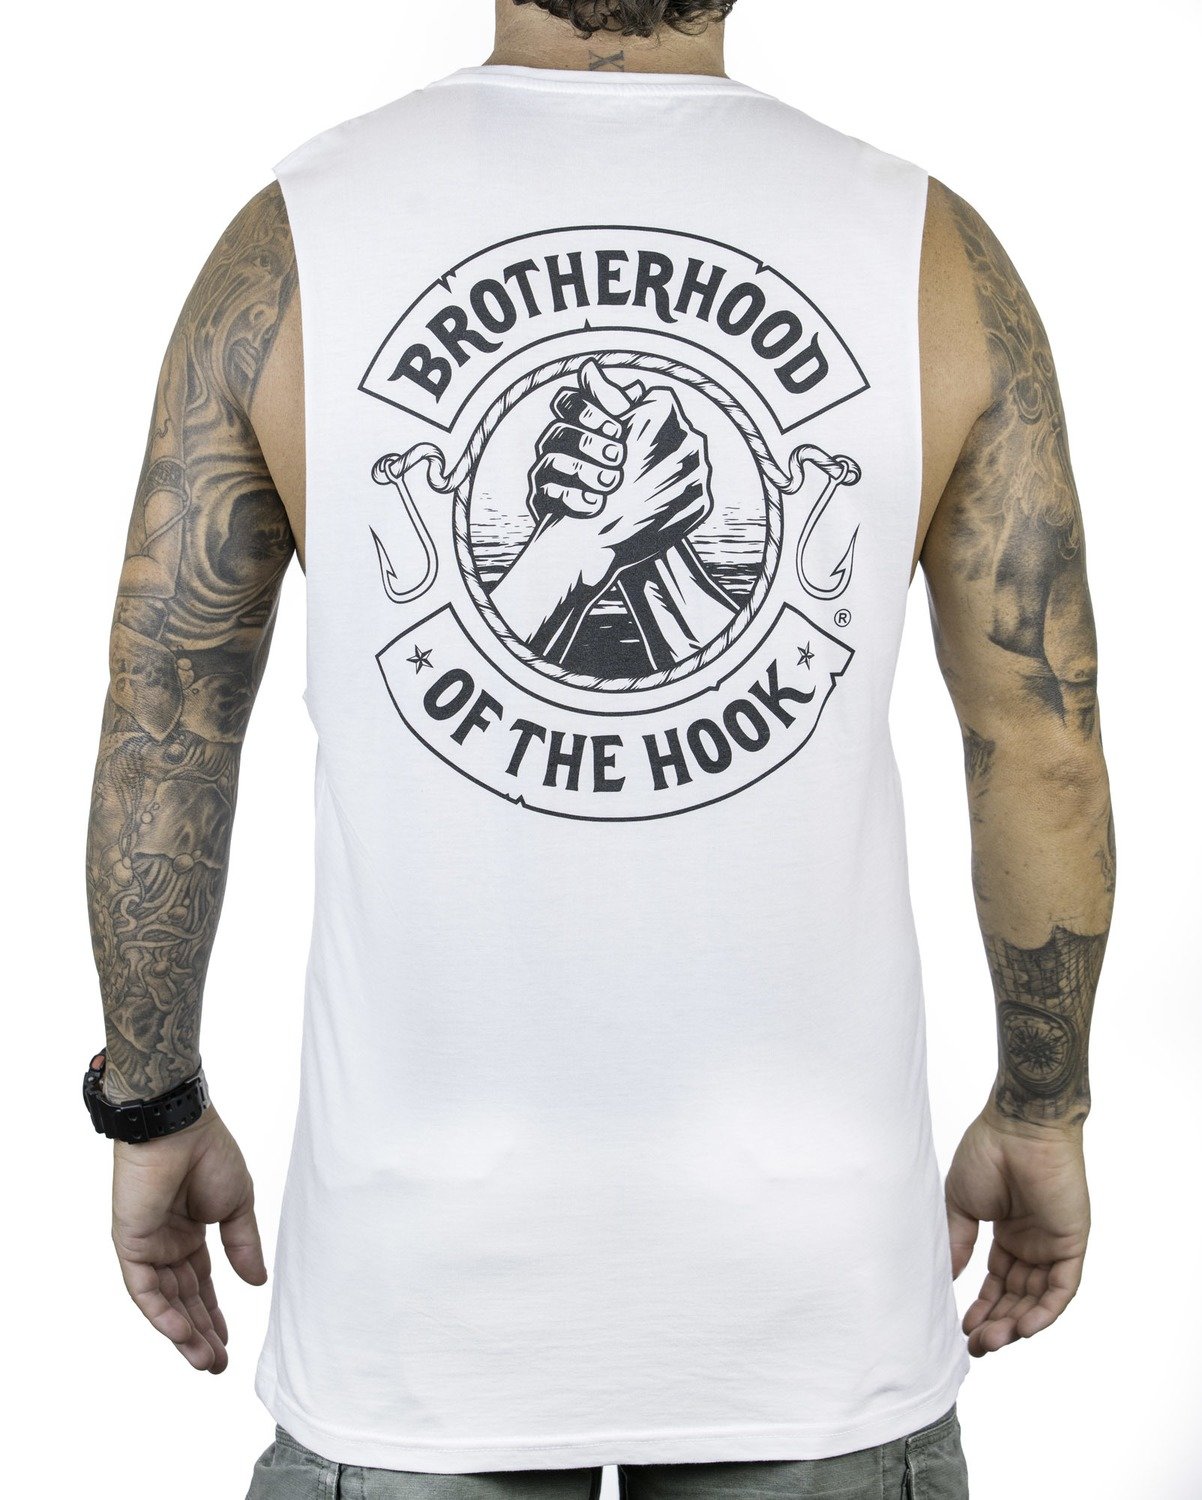 BROTHERHOOD OF THE HOOK - muscle singlet / white cotton